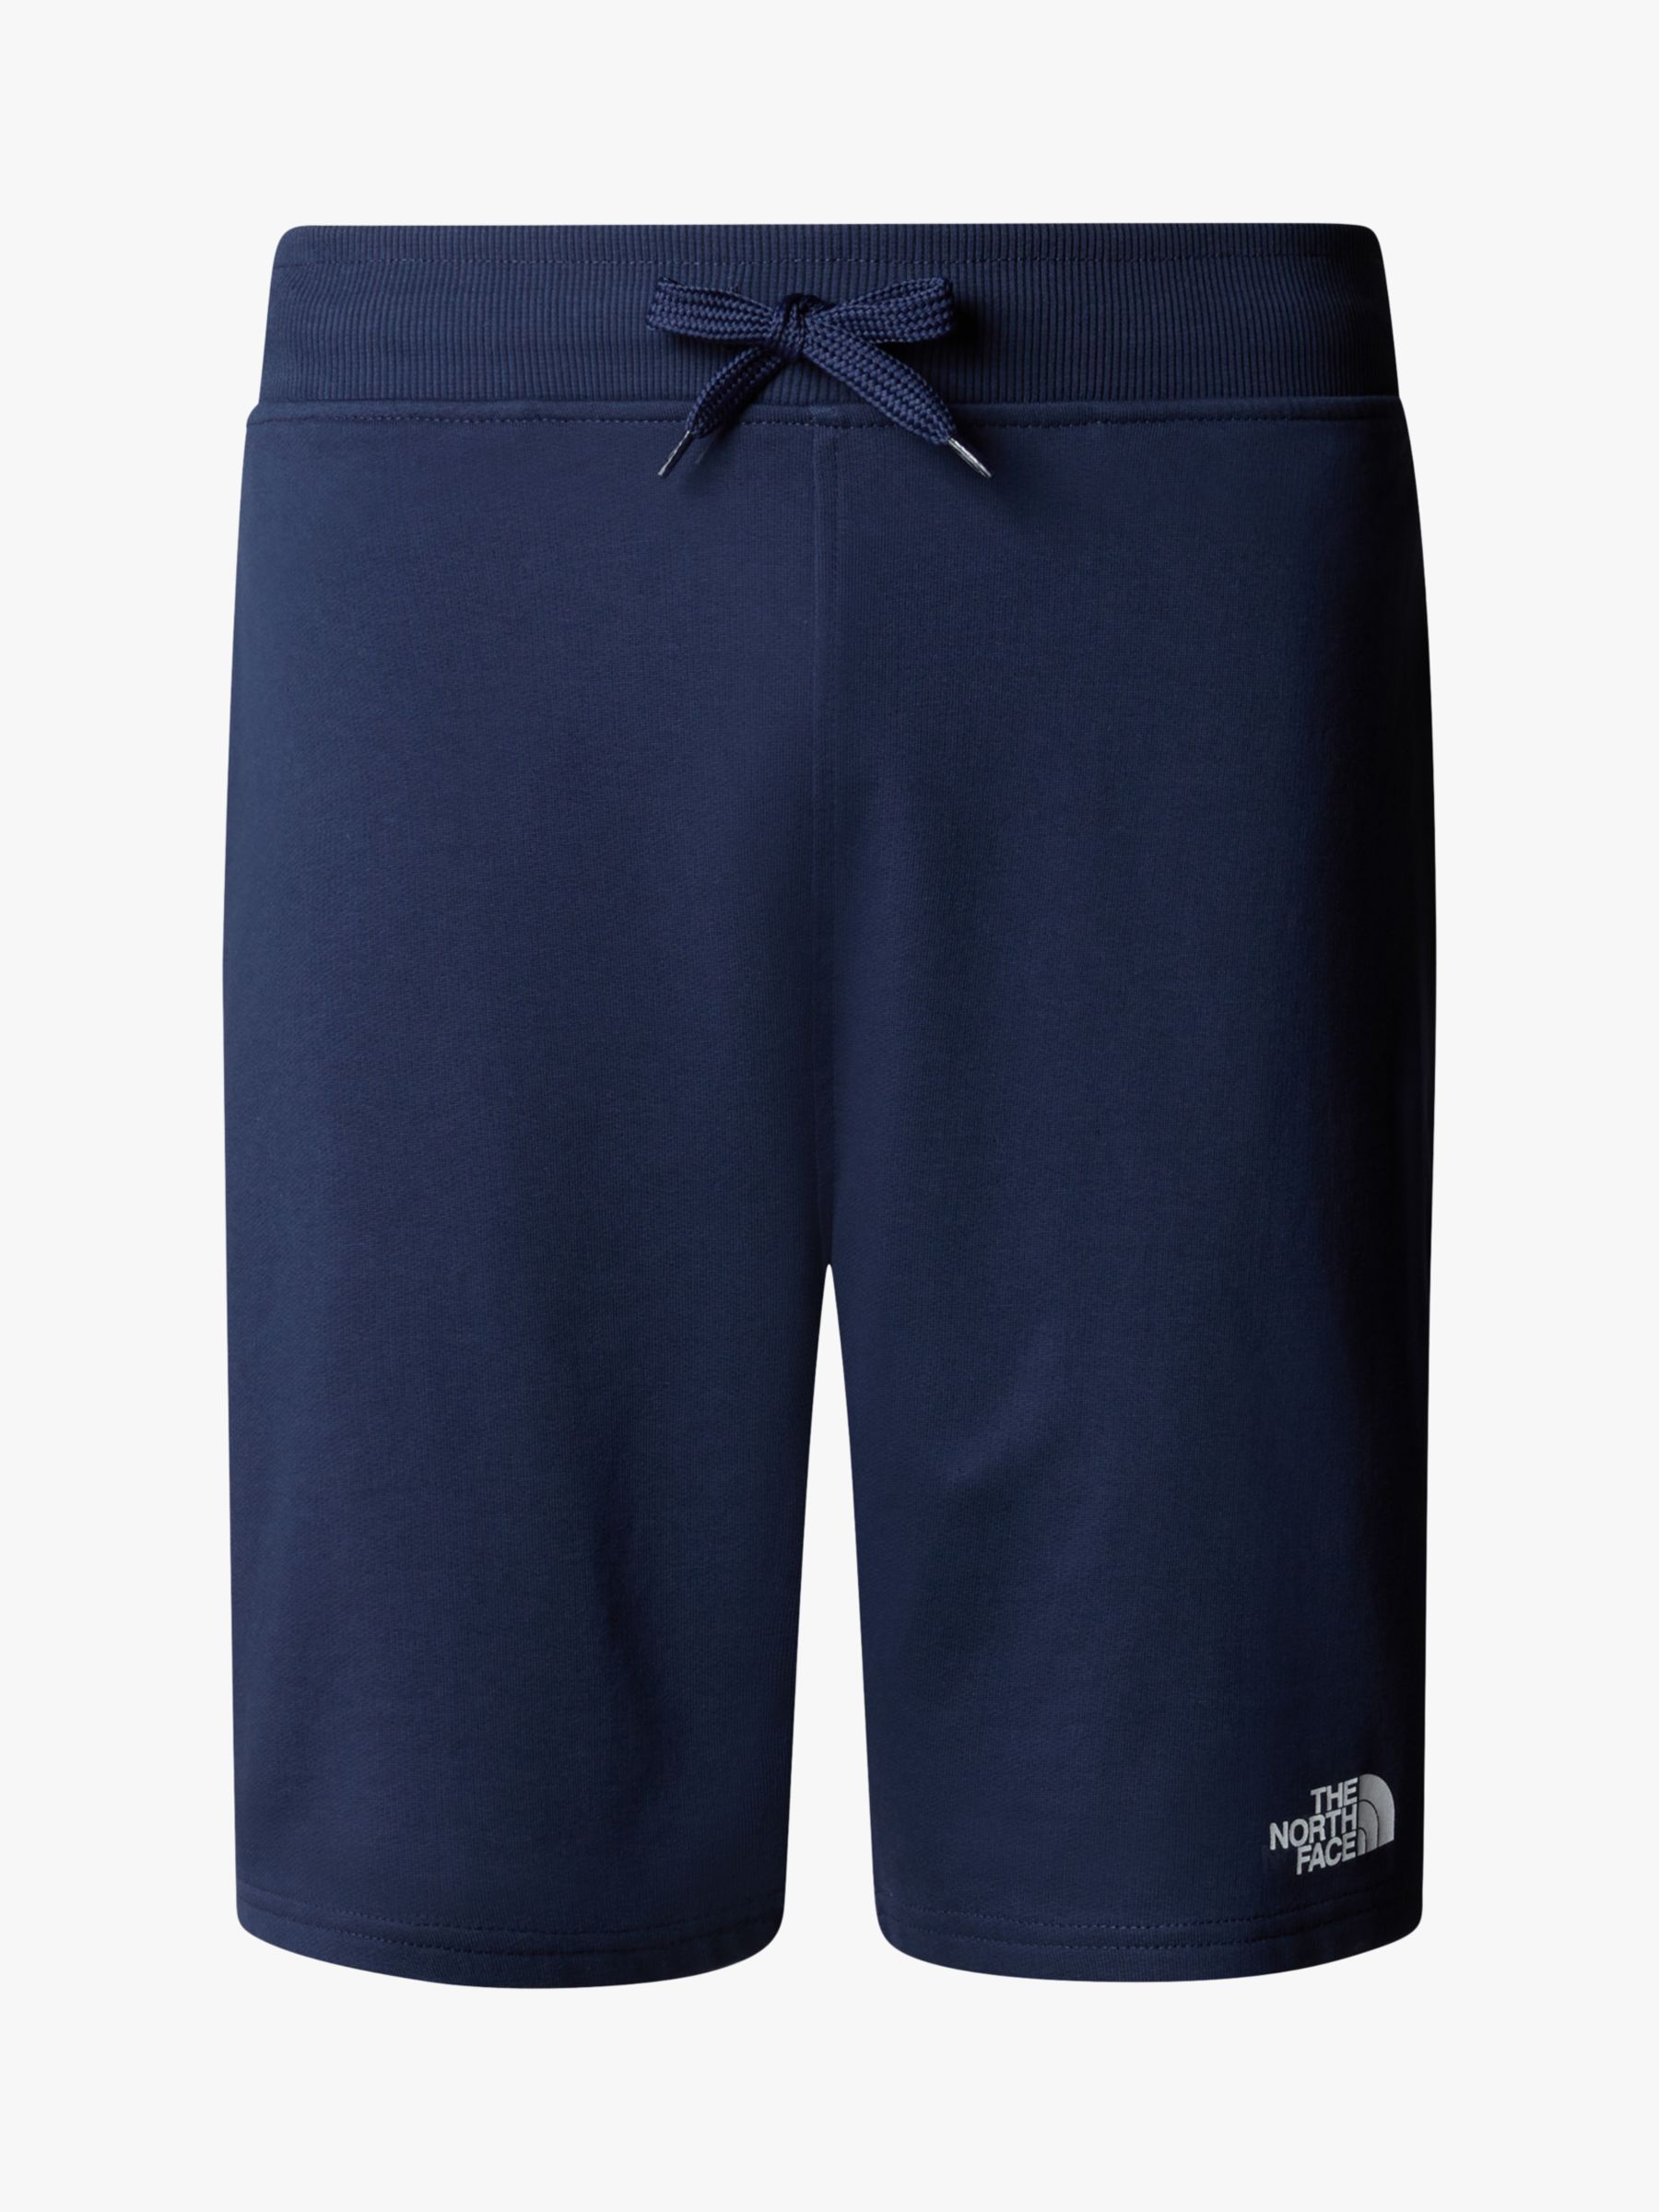 Buy The North Face Cotton Shorts, Summit Navy Online at johnlewis.com